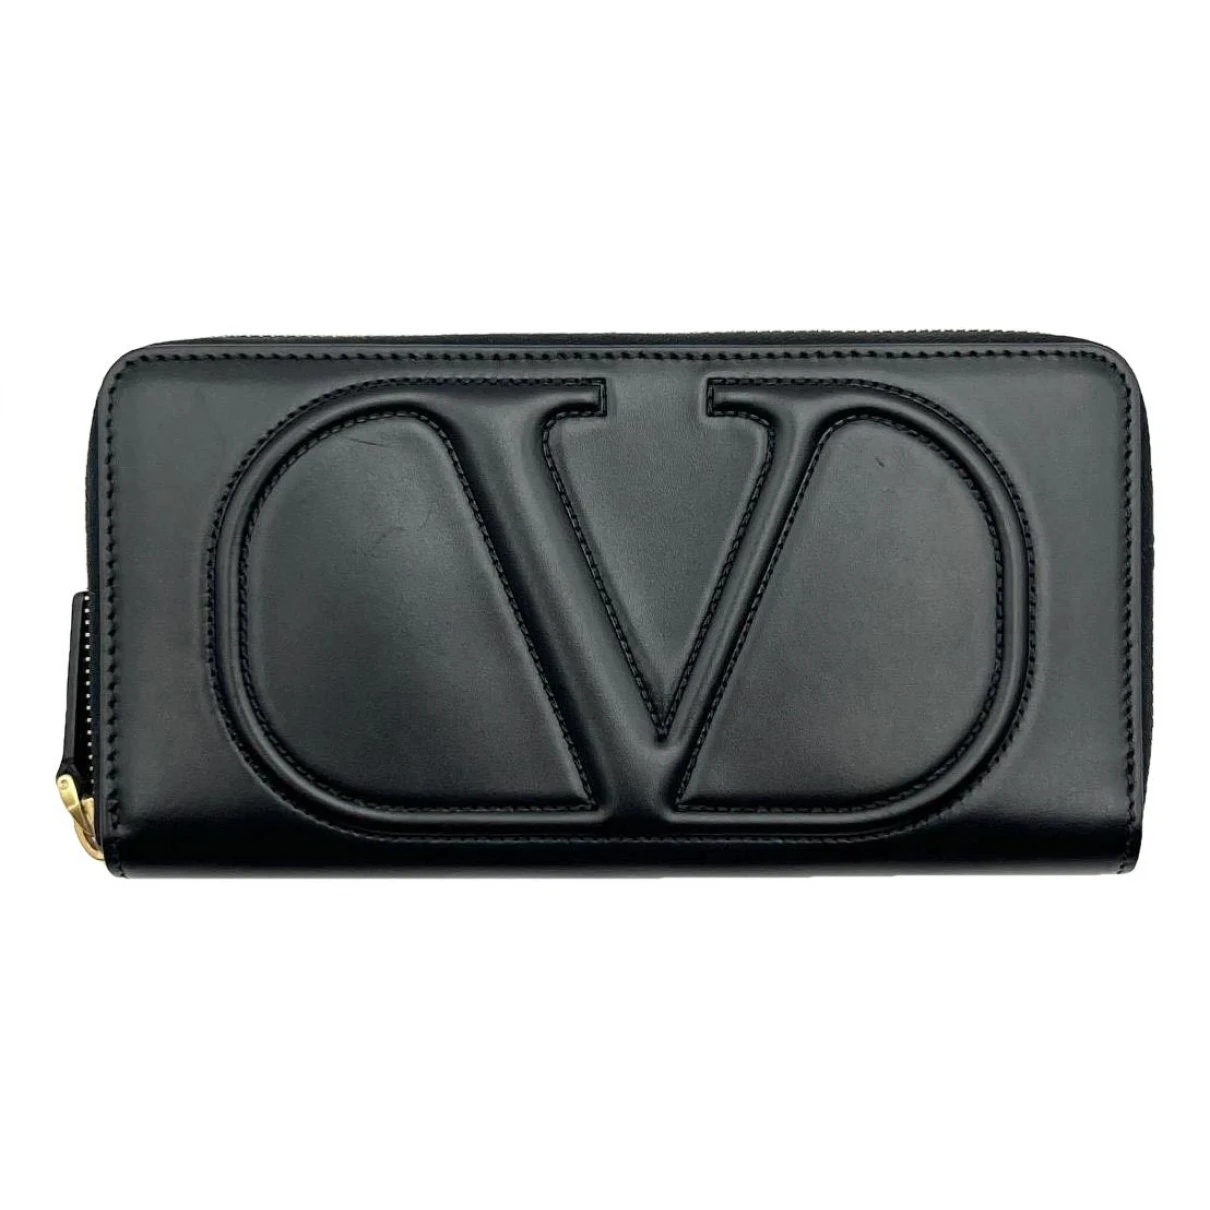 bags Valentino Garavani small bags, wallets & cases for Male Leather. Used condition